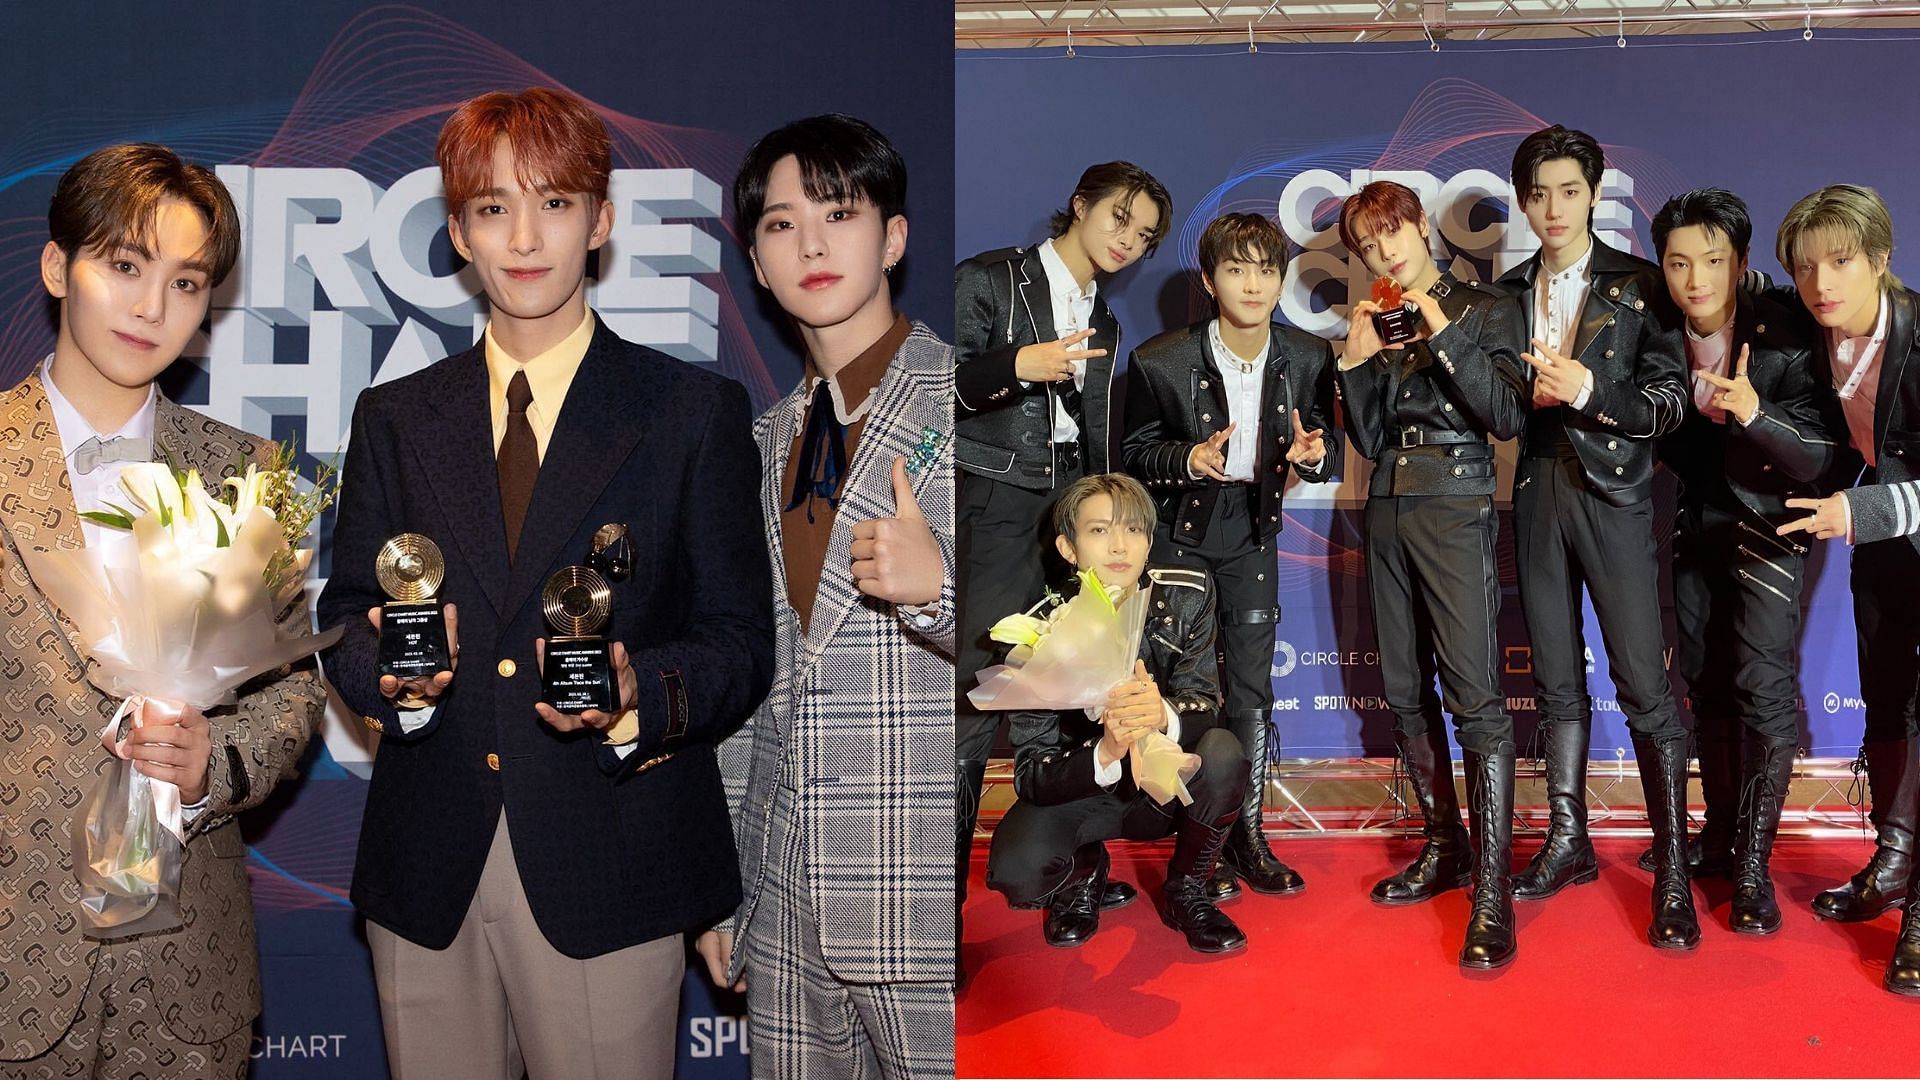 All the winners of the 12th Circle Chart Music Awards